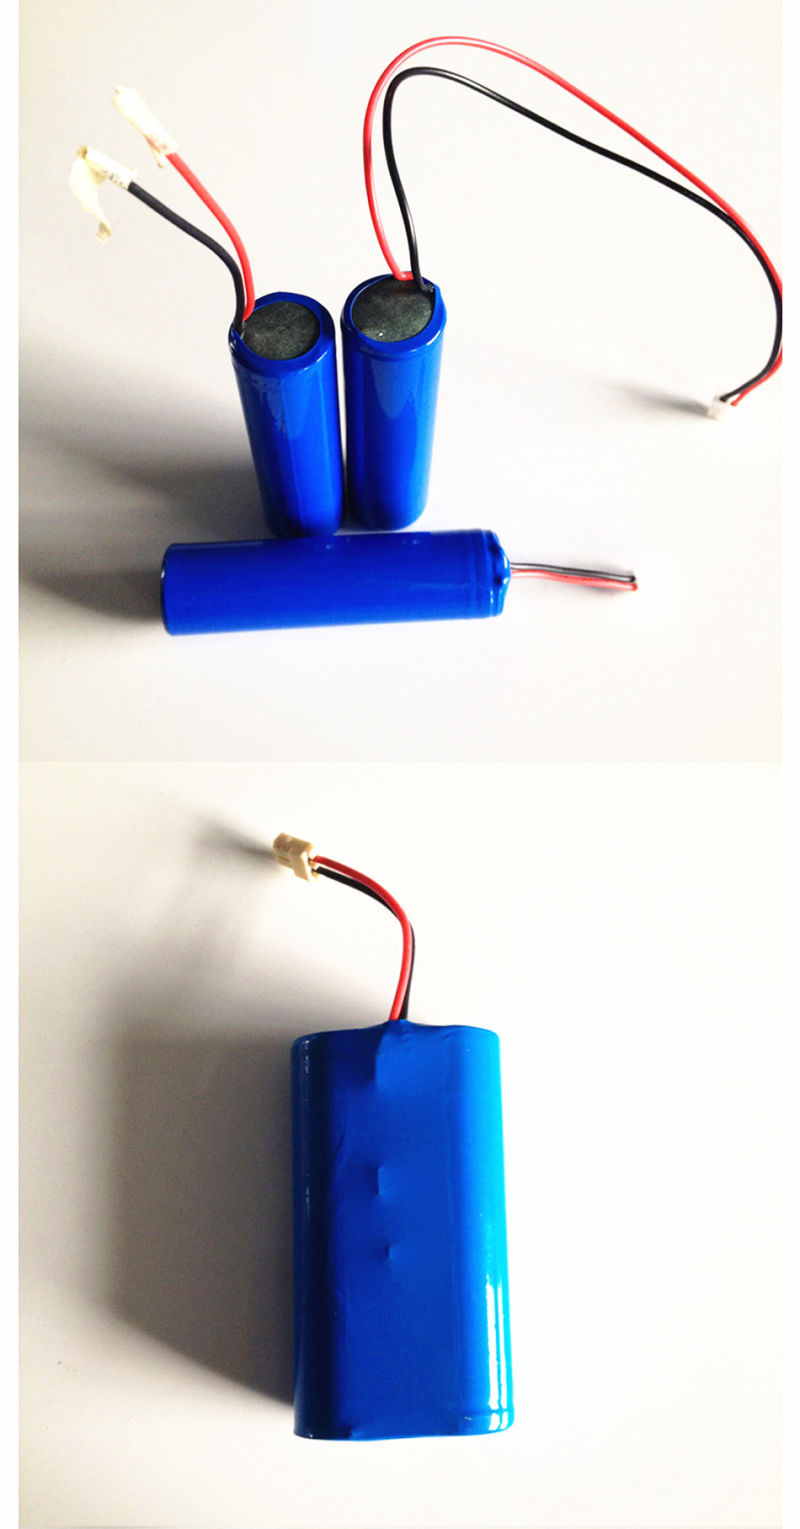 OEM 3.7V 18650 Cylindrical/Rechargeable/Lithium/Li-ion Battery for LED Touch Light Flashlight